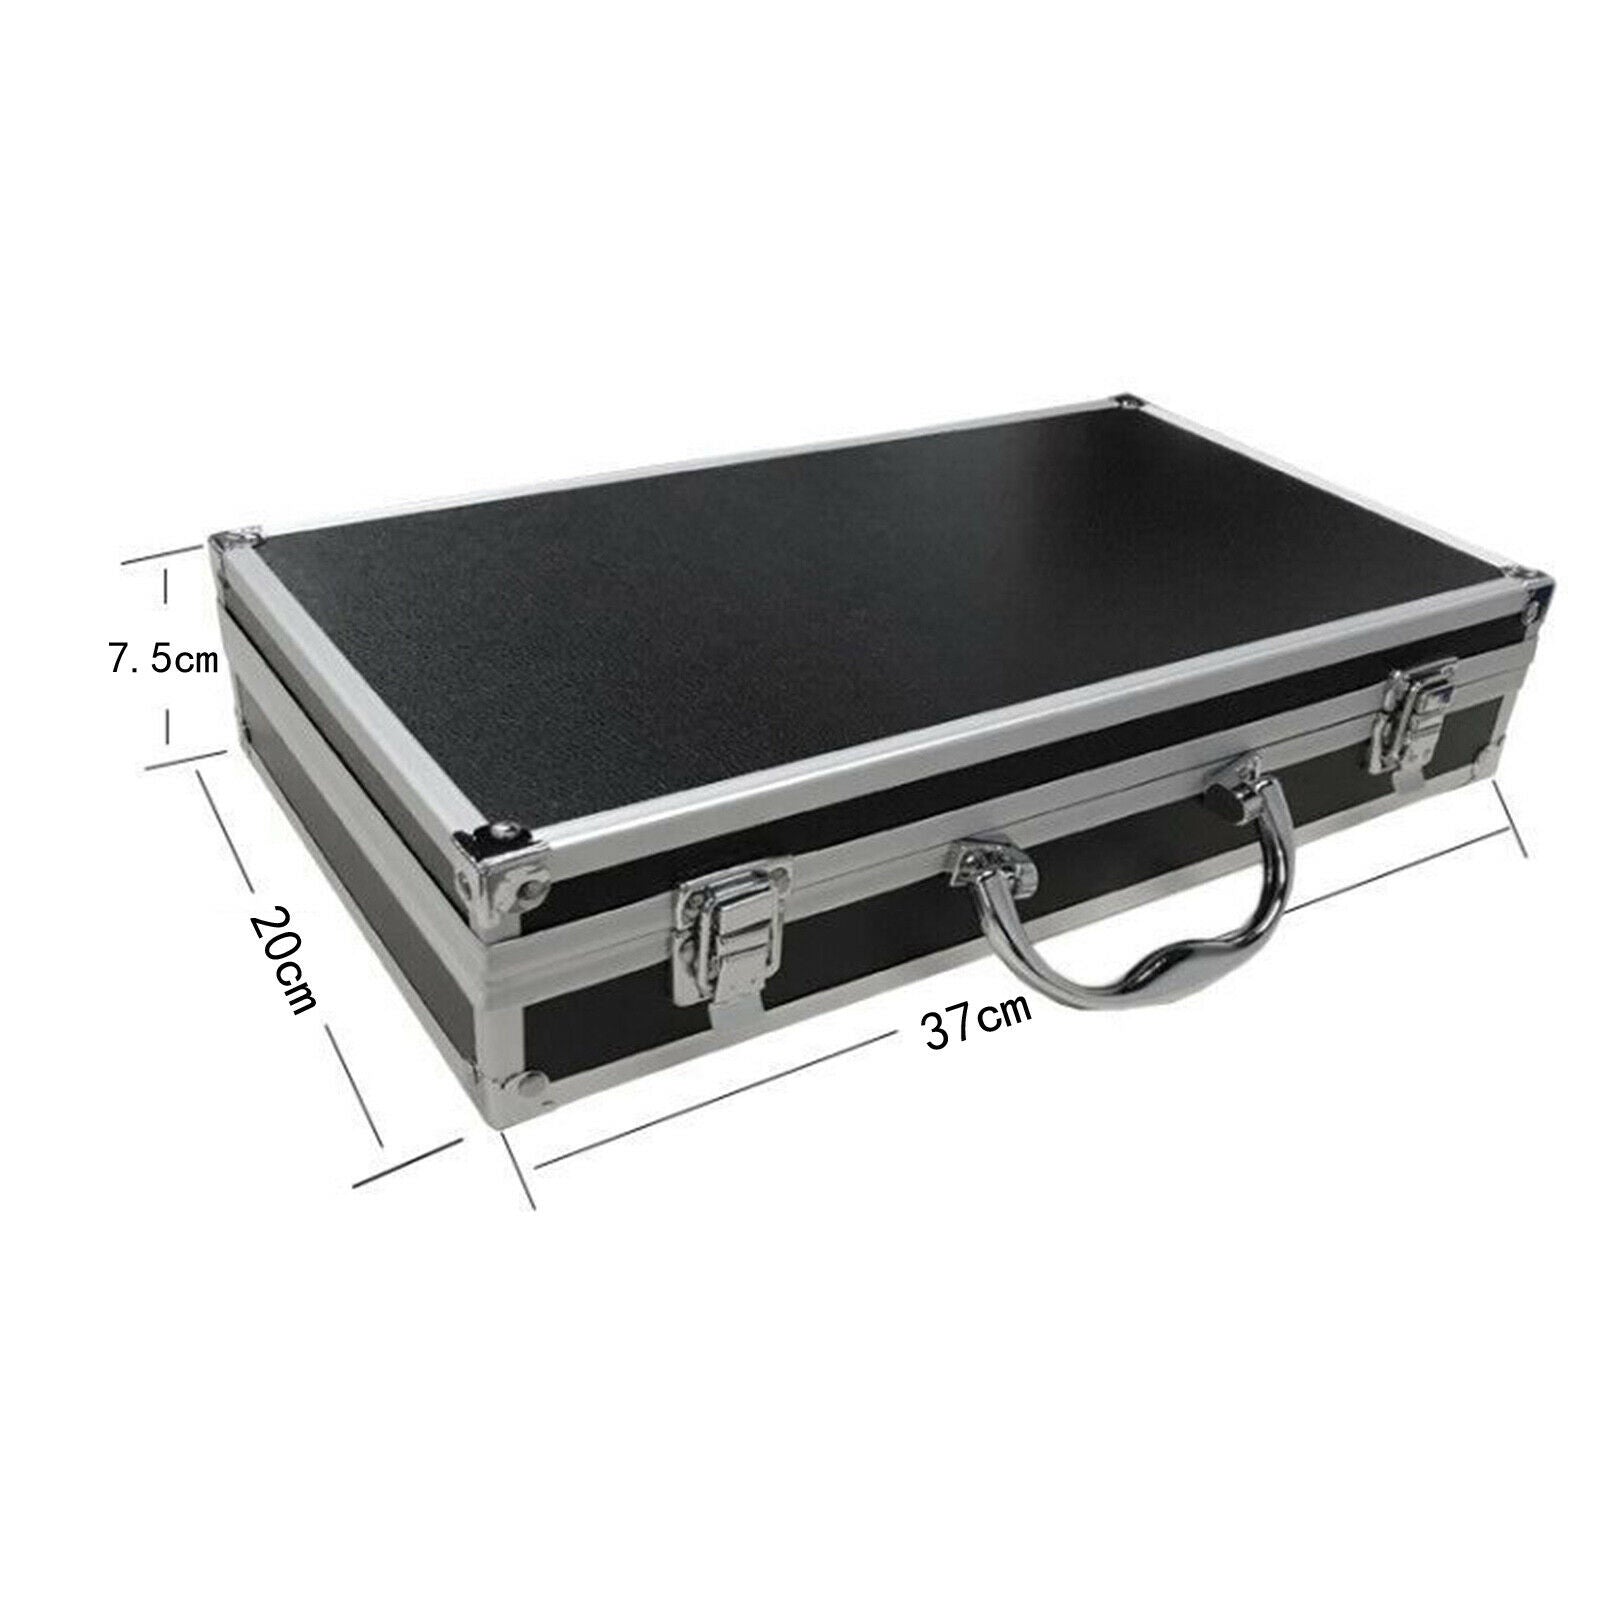 Wireless Microphone Carrying Case Instrument Box Suitcase Mixer Accessories